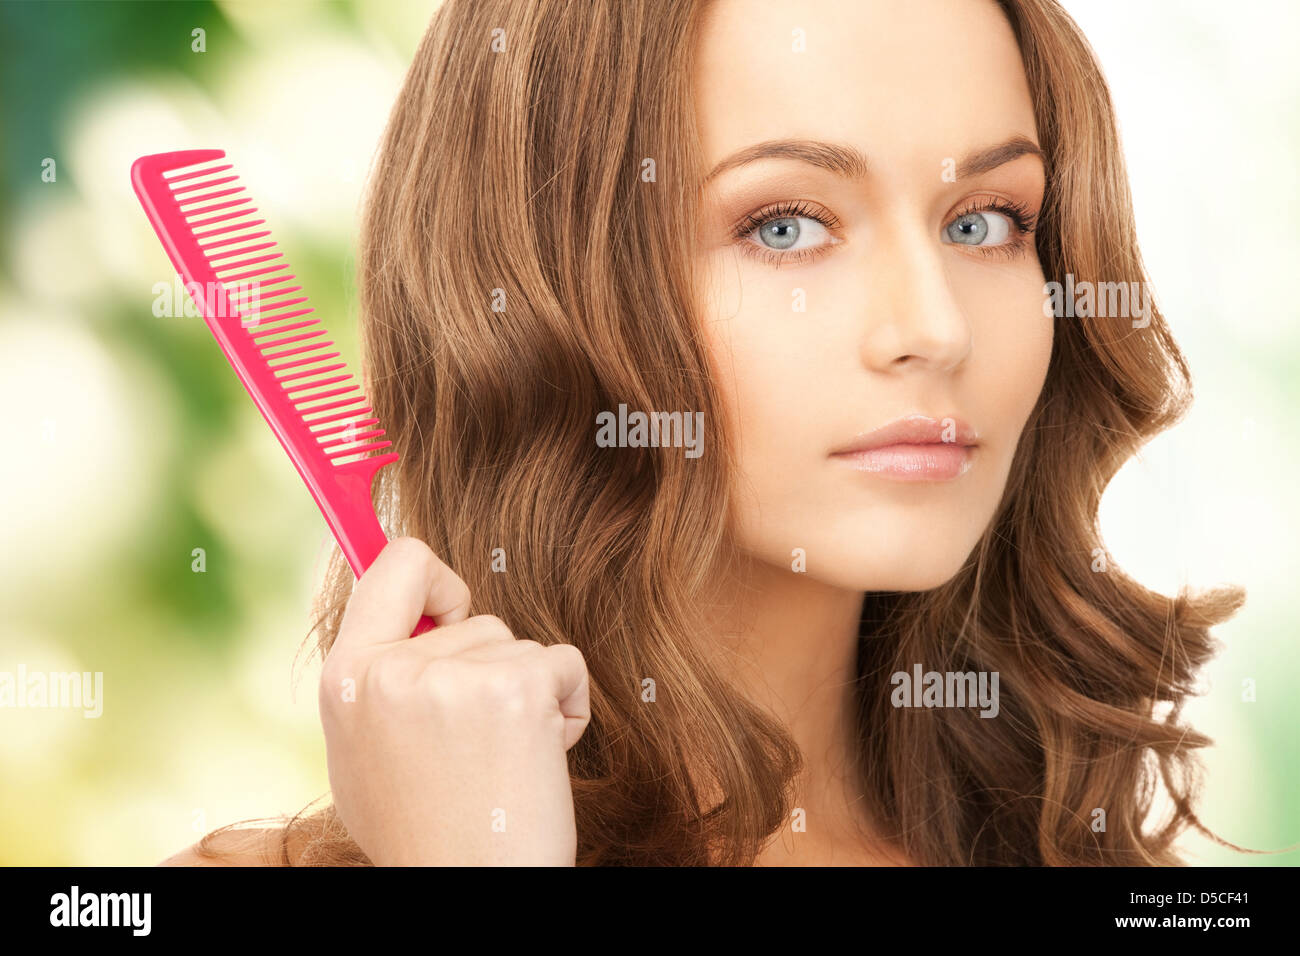 beautiful woman with comb Stock Photo